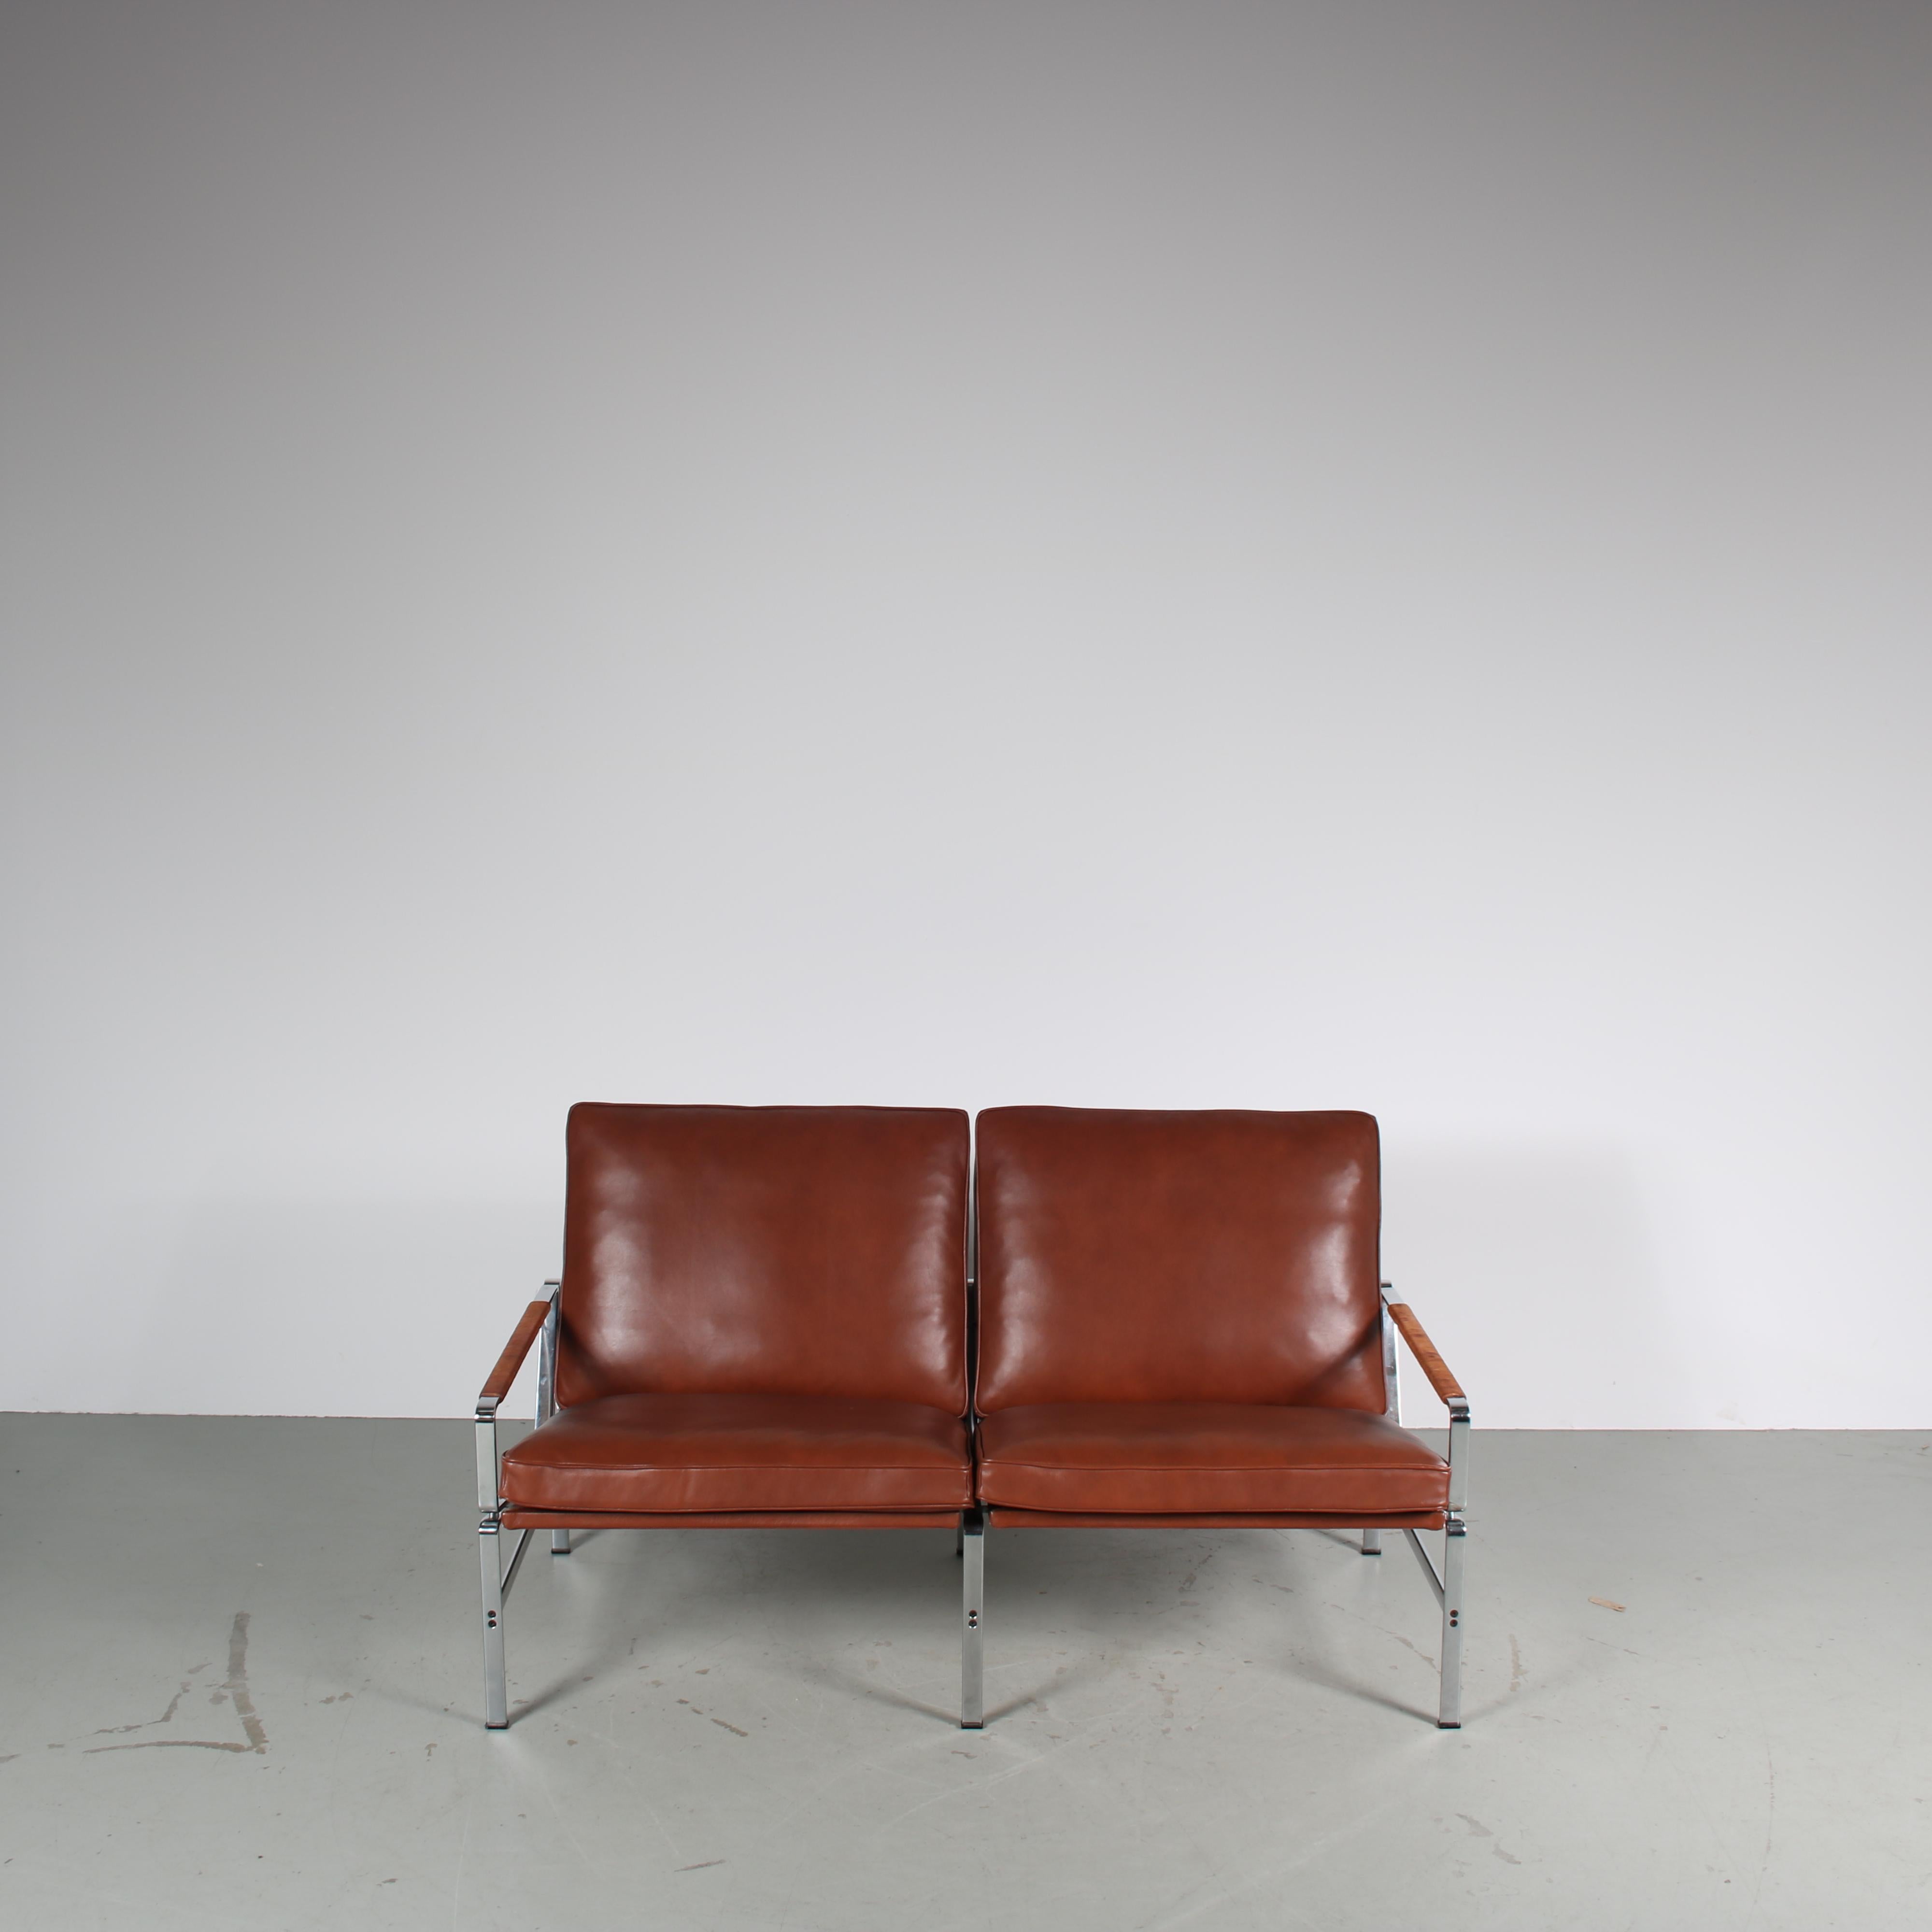 “FK6720” Sofa by Fabricius & Kastholm for Kill International, Germany 1960 For Sale 3